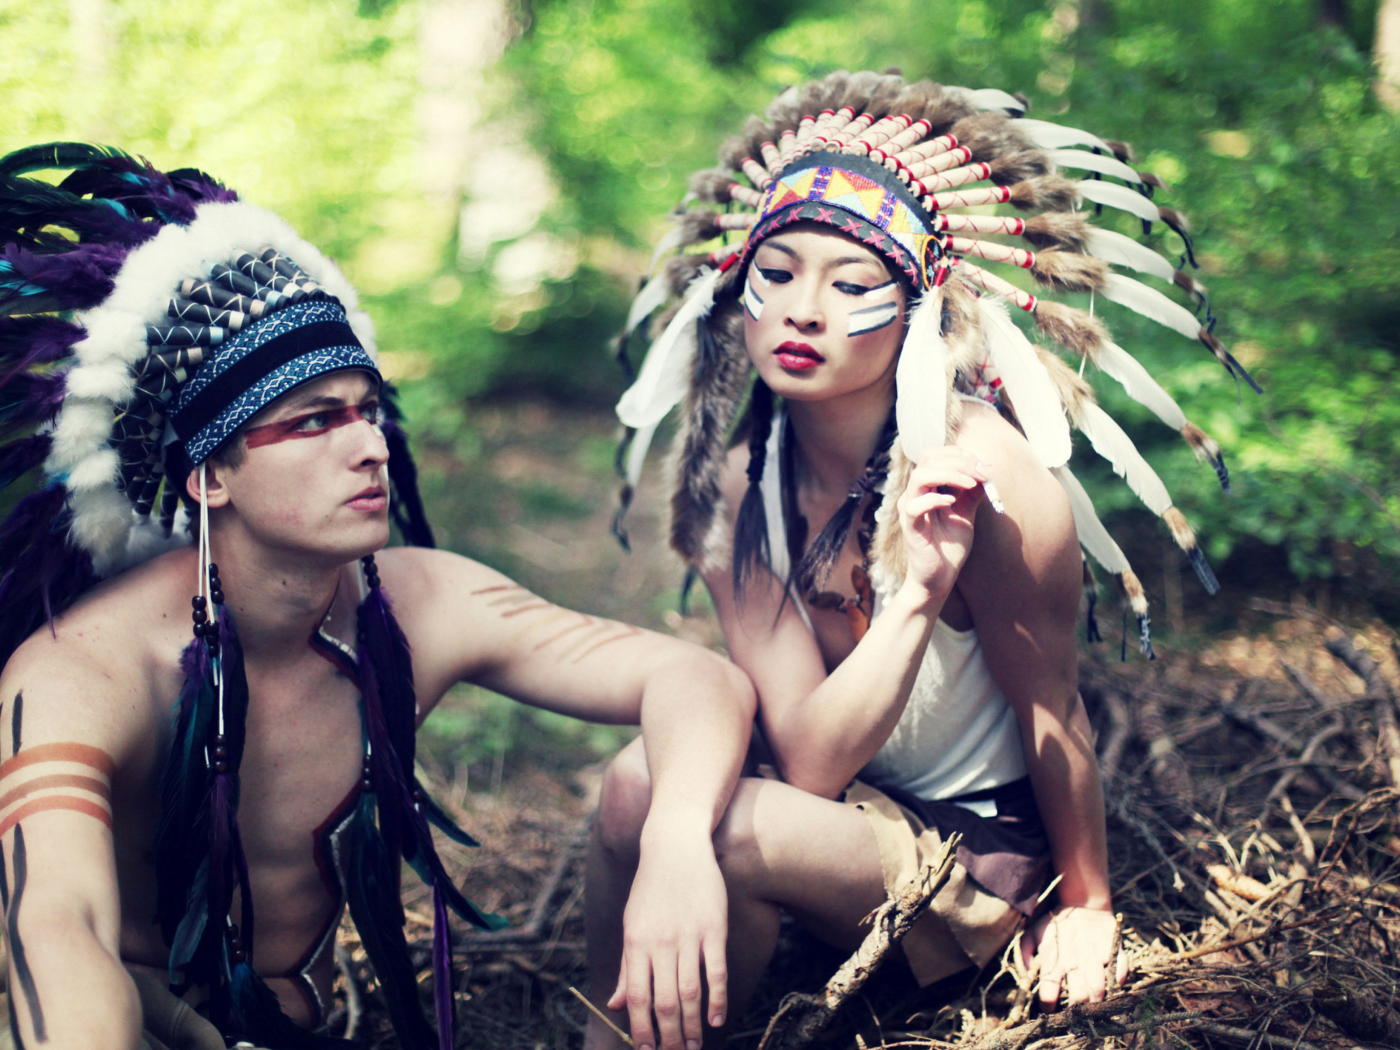 Indian Feather Hat wallpaper 1400x1050